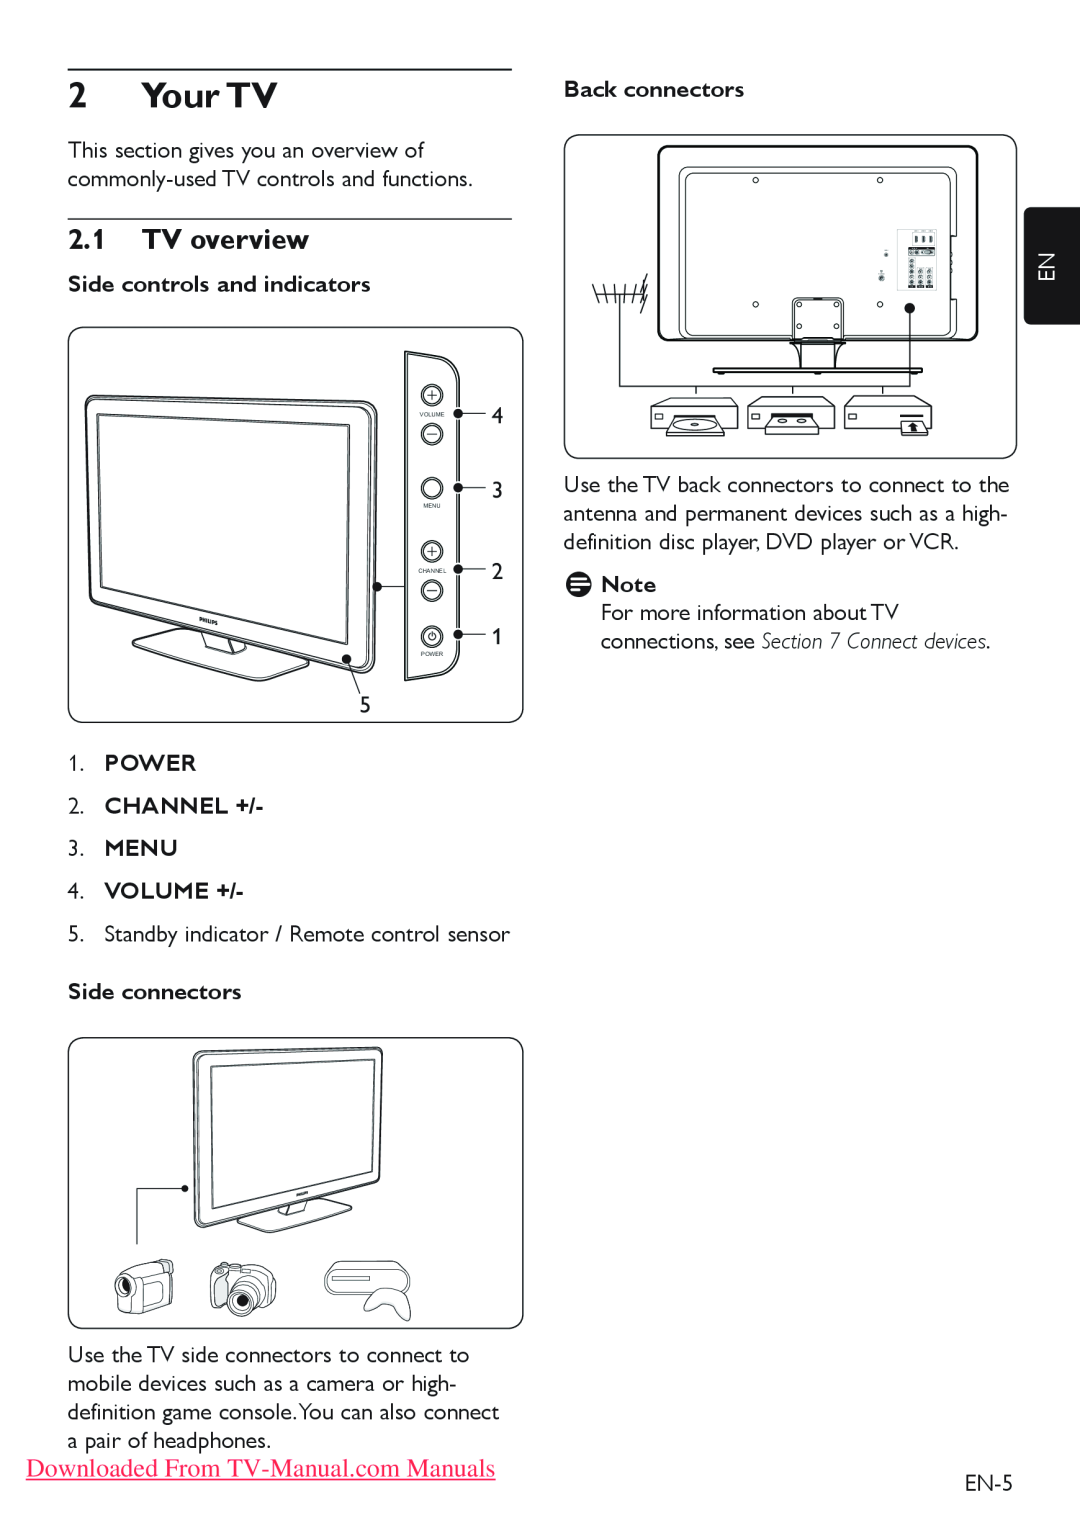 Philips 47PFL7403 Your TV, 2.1TV overview, Side controls and indicators, POWER 2.CHANNEL + 3.MENU 4.VOLUME +, DDNote, EN-5 